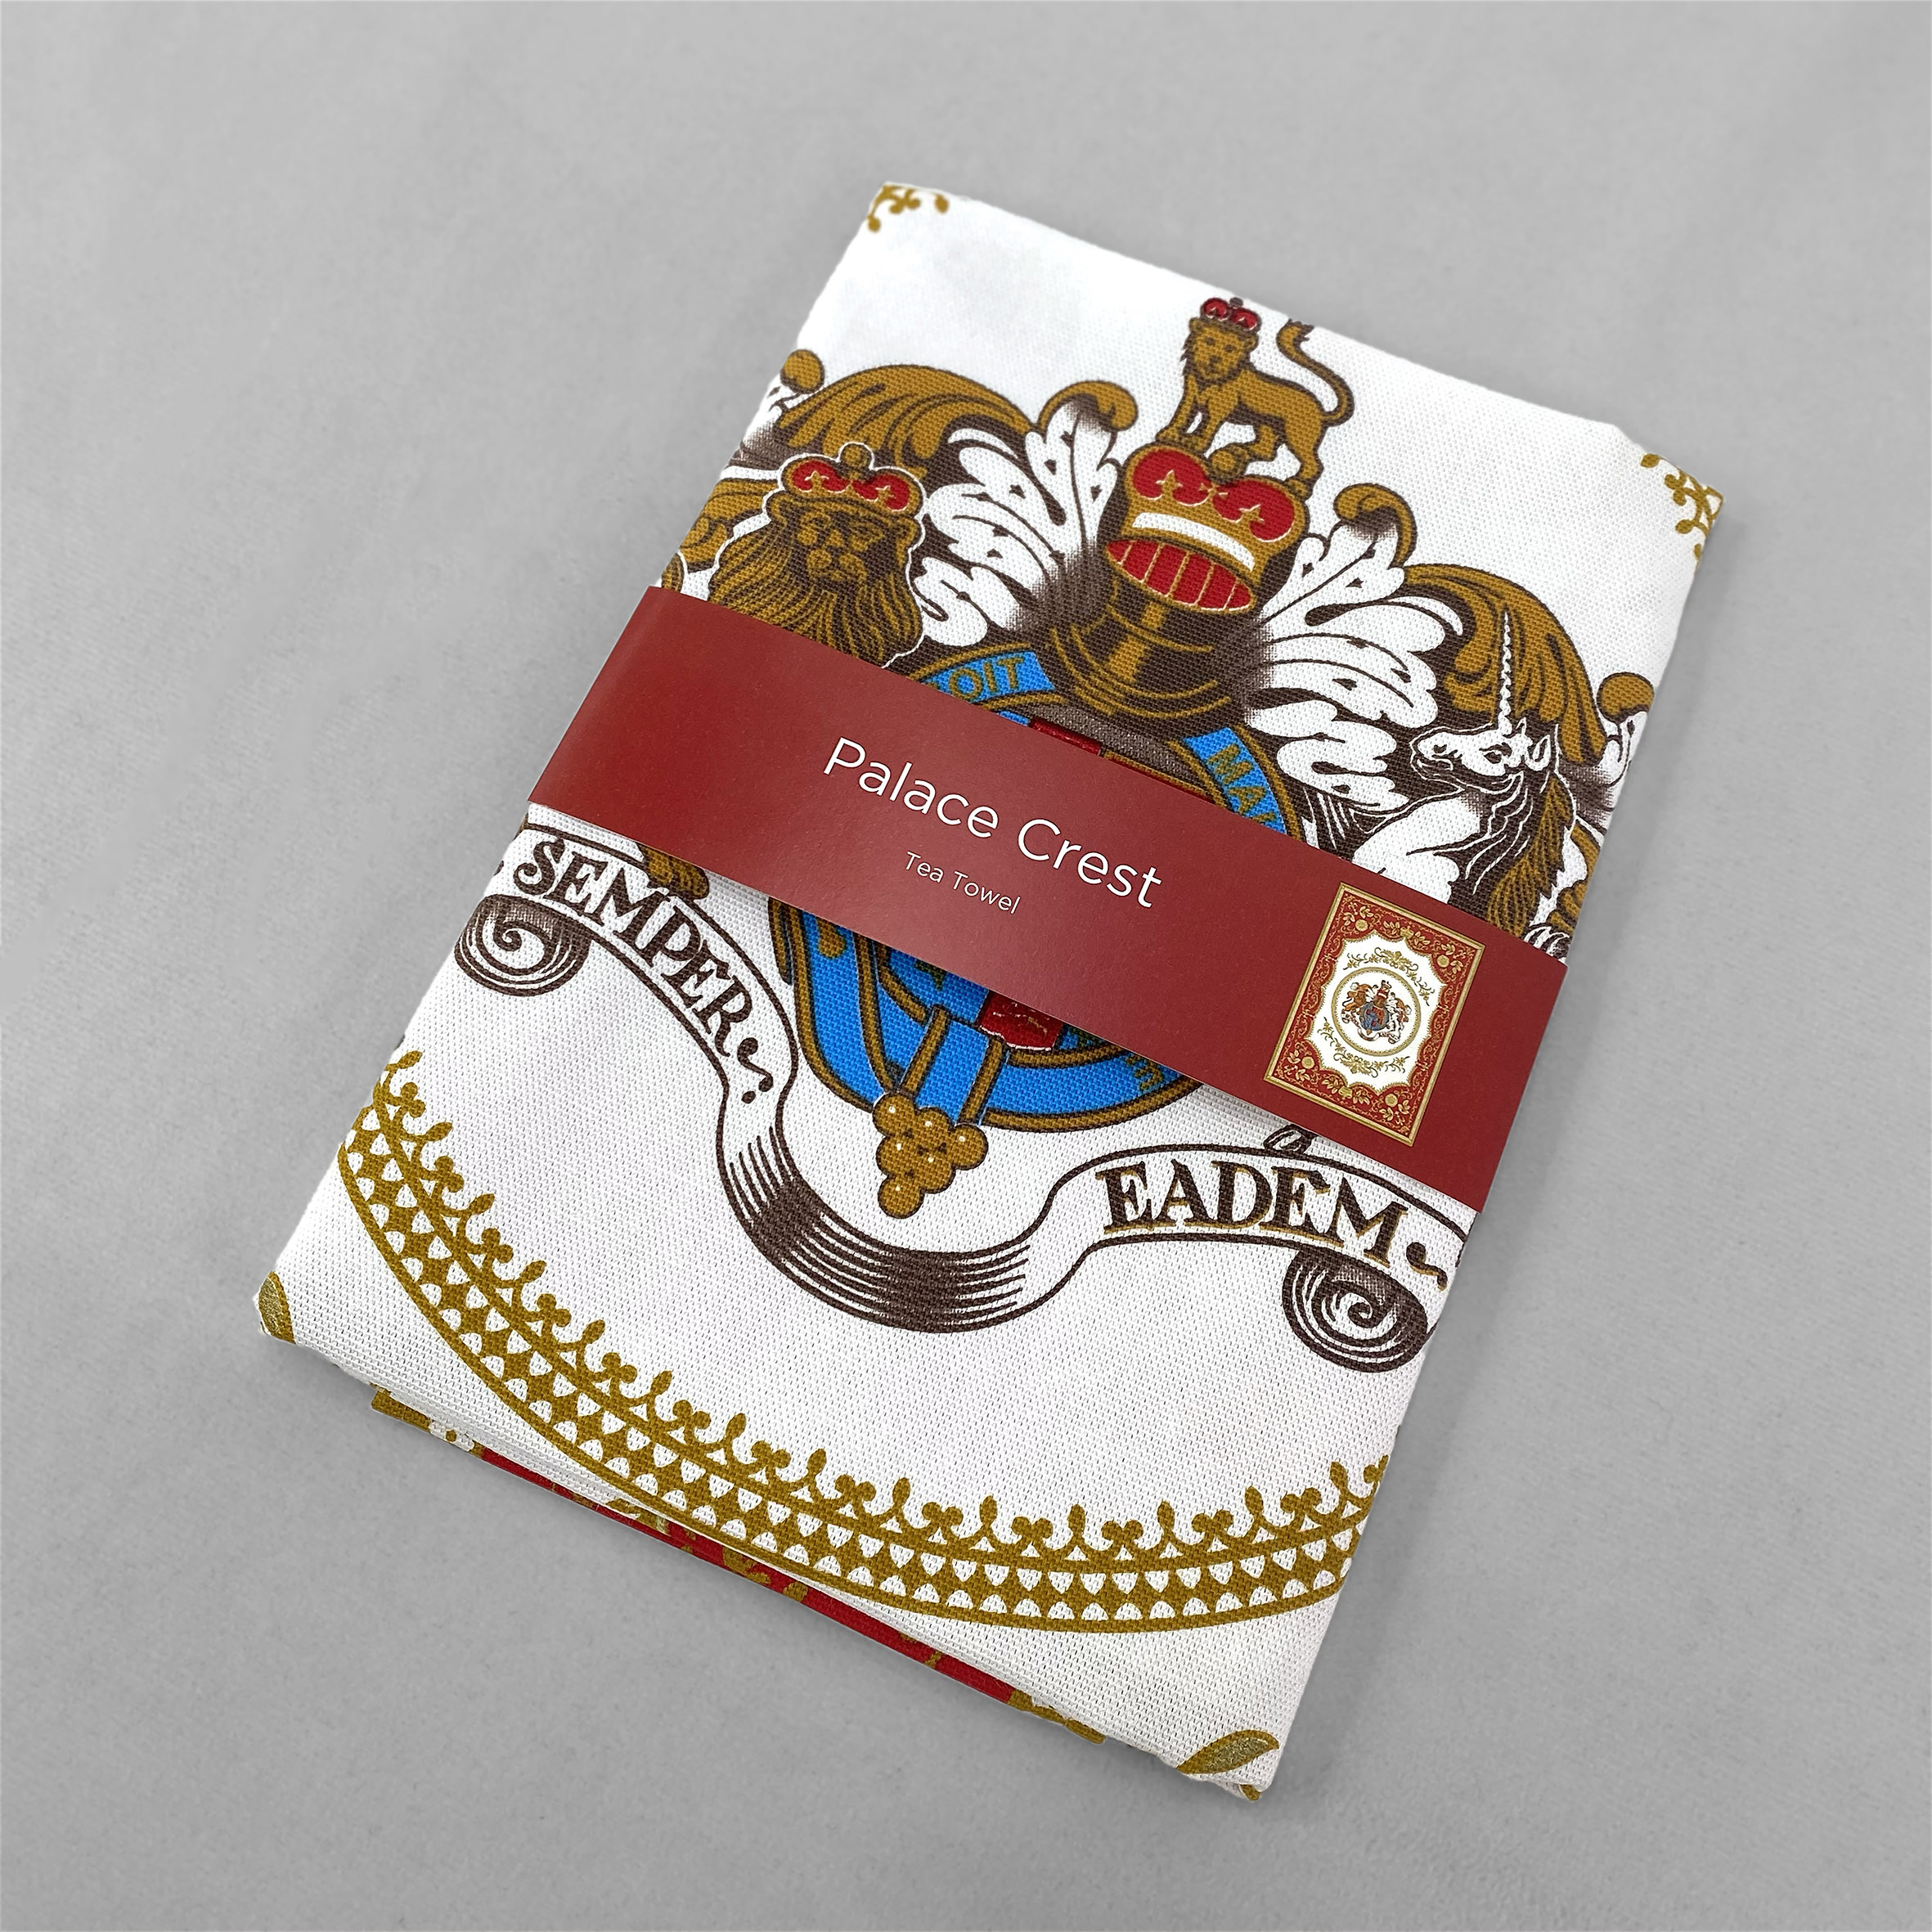 Historic Royal Palaces screen printed tea towel with belly band packaging